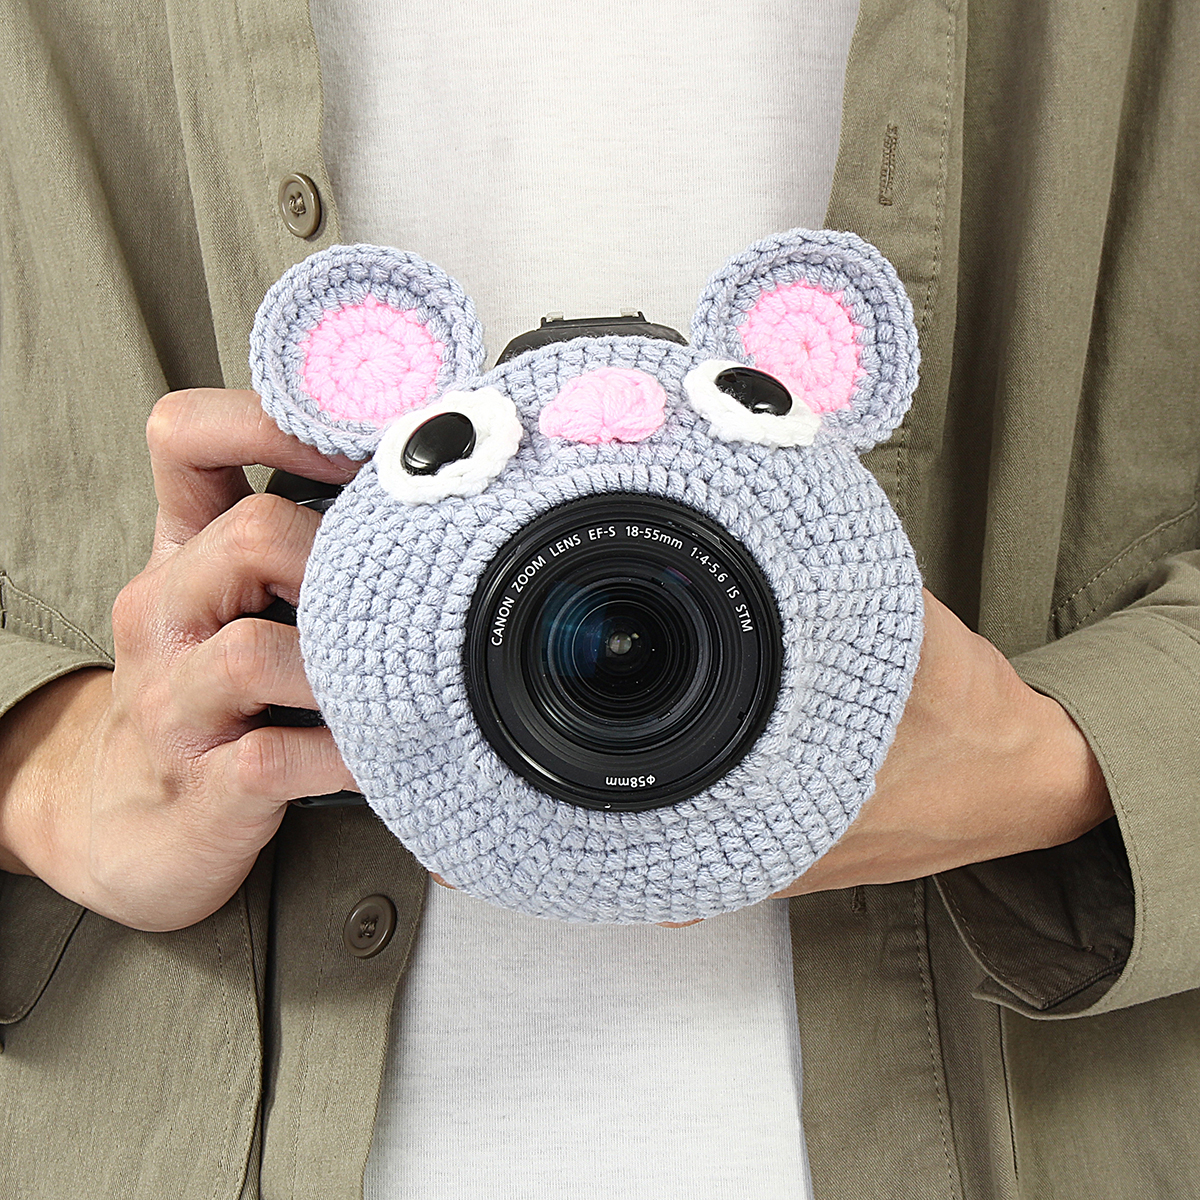 Hand-knitted-Wool-Decor-Case-For-Camera-Lens-Decorative-Photo-Guide-Doll-Toys-For-Kids-1457648-9